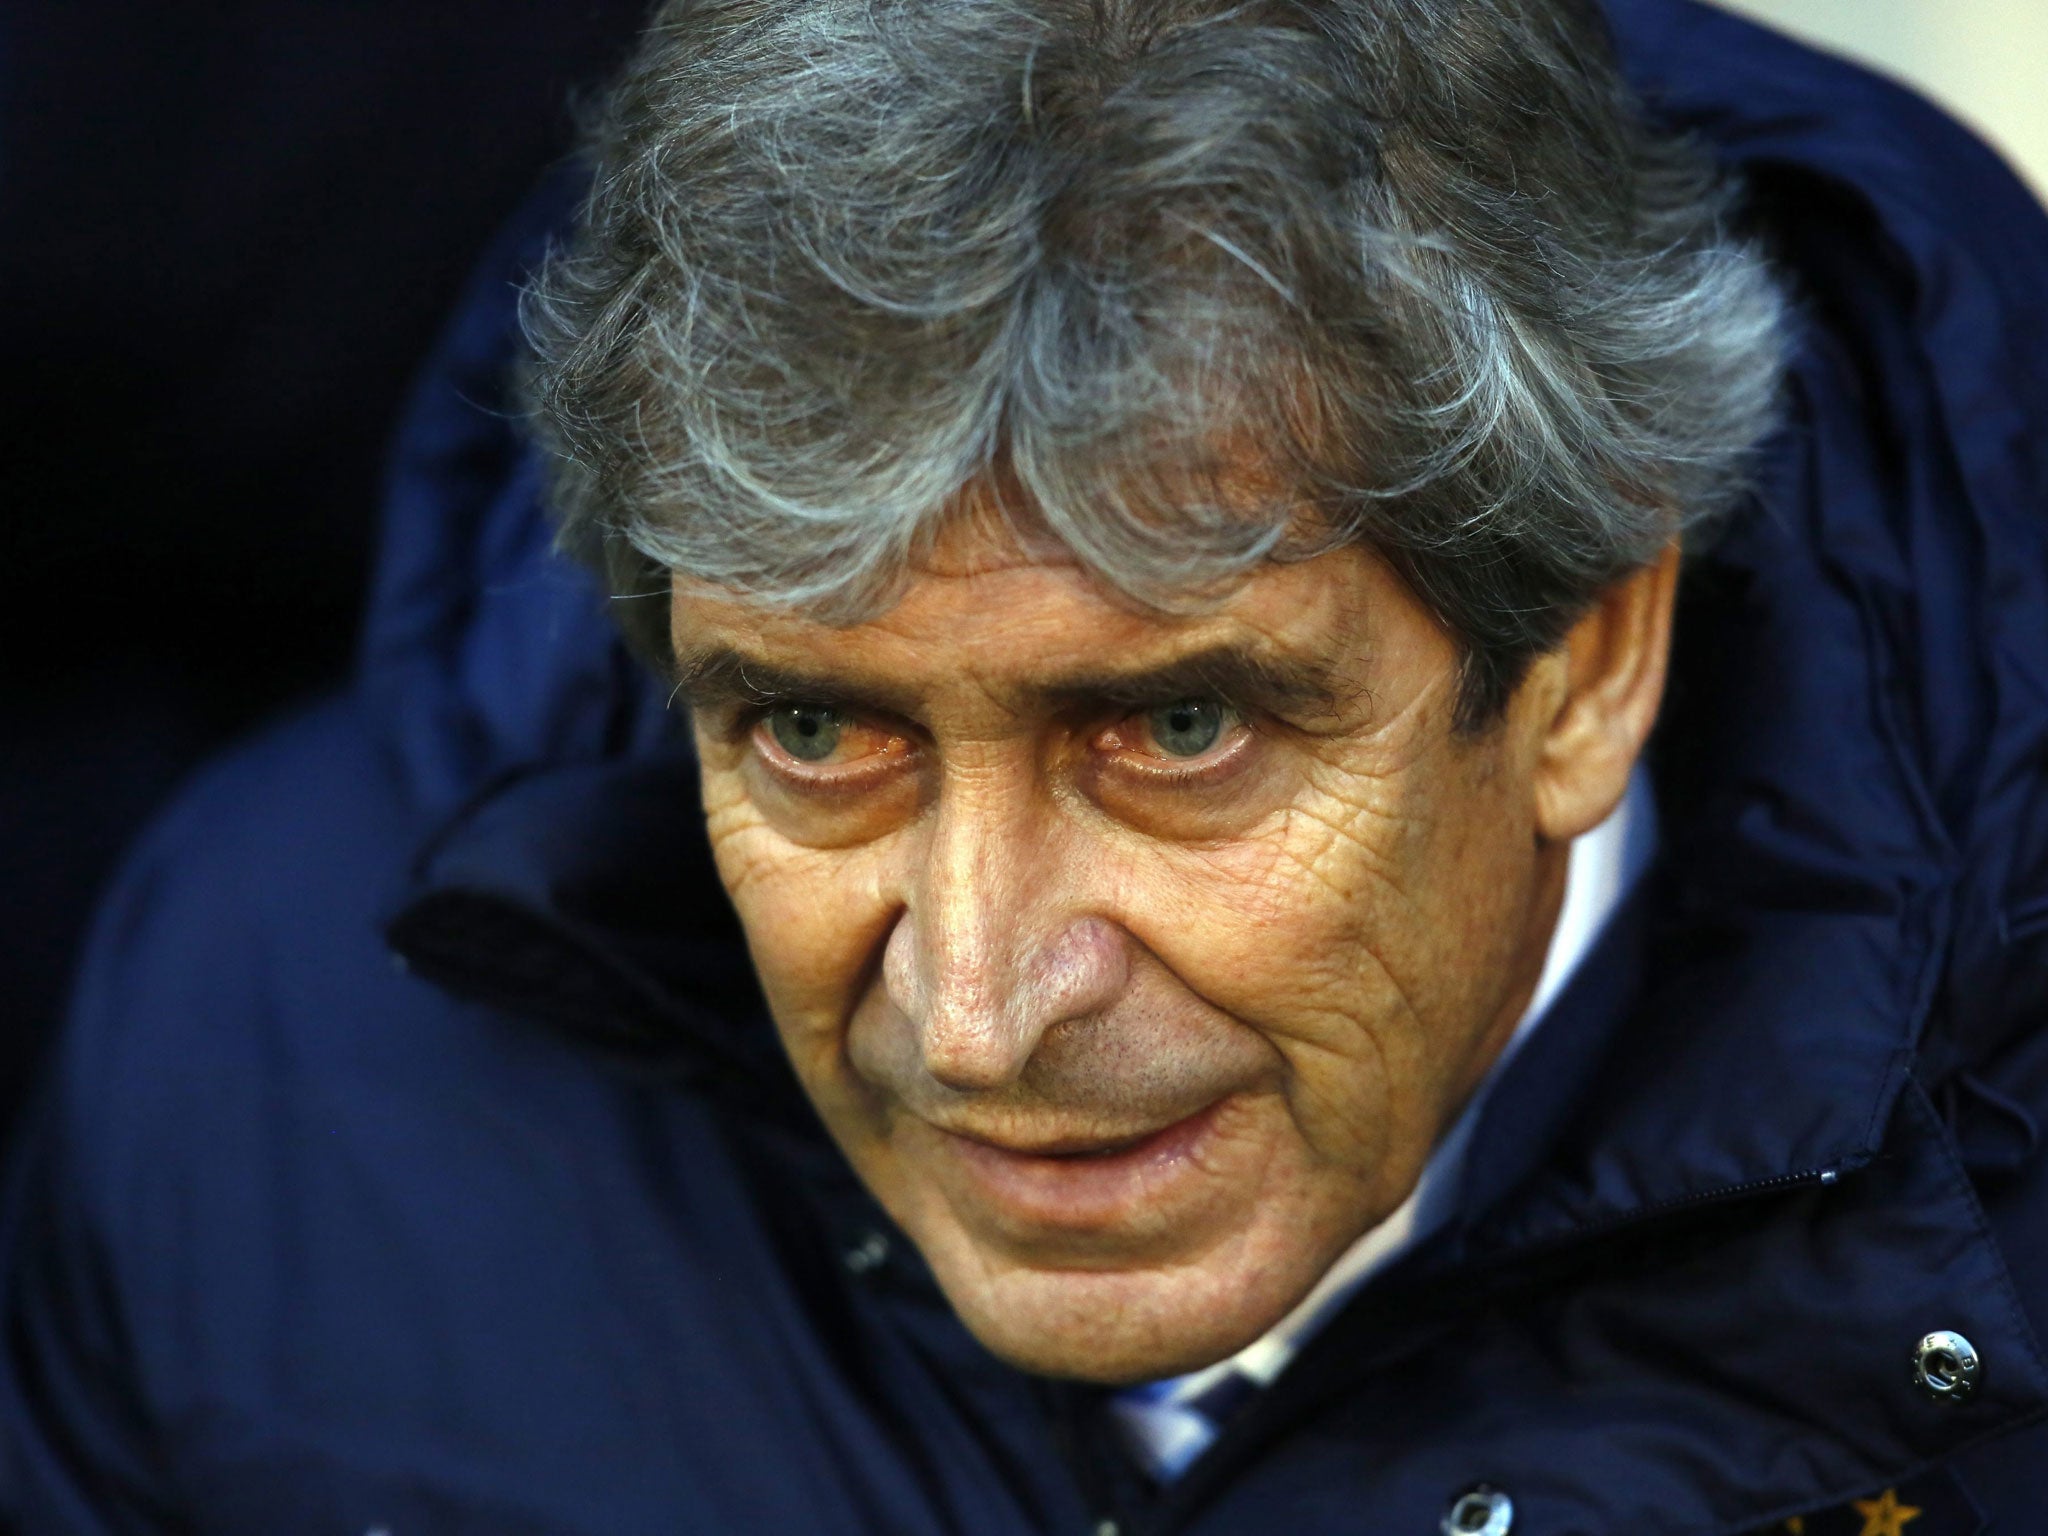 Under Pellegrini, Manchester City are on their way to surpass 100 goals scored this season